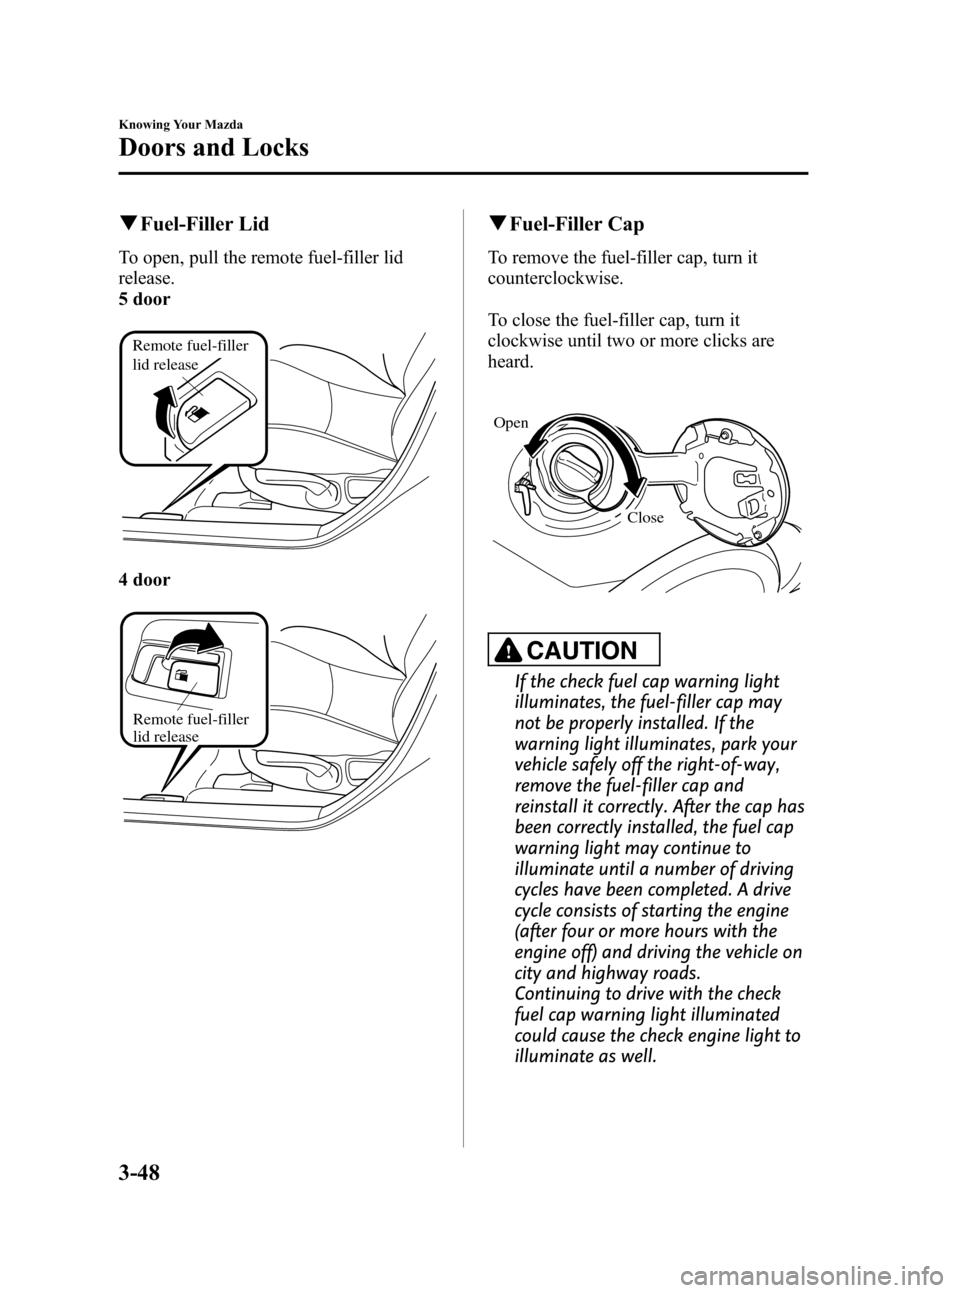 MAZDA MODEL 3 HATCHBACK 2011  Owners Manual (in English) Black plate (124,1)
qFuel-Filler Lid
To open, pull the remote fuel-filler lid
release.
5 door
Remote fuel-filler 
lid release
4 door
Remote fuel-filler 
lid release
qFuel-Filler Cap
To remove the fuel